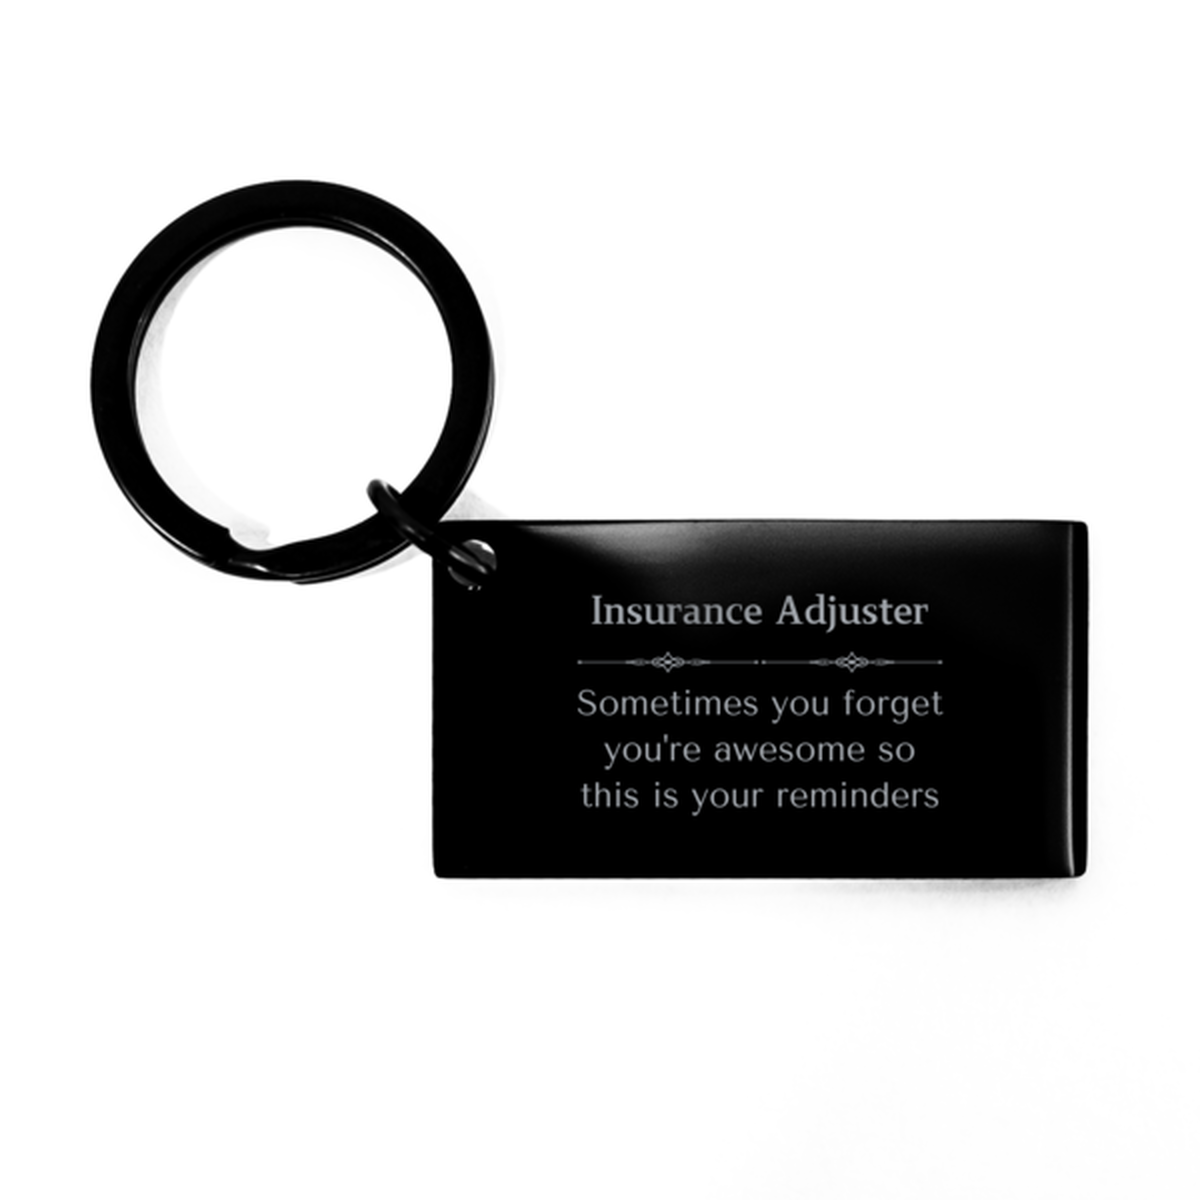 Sentimental Insurance Adjuster Keychain, Minister Sometimes you forget you're awesome so this is your reminders, Graduation Christmas Birthday Gifts for Insurance Adjuster, Men, Women, Coworkers